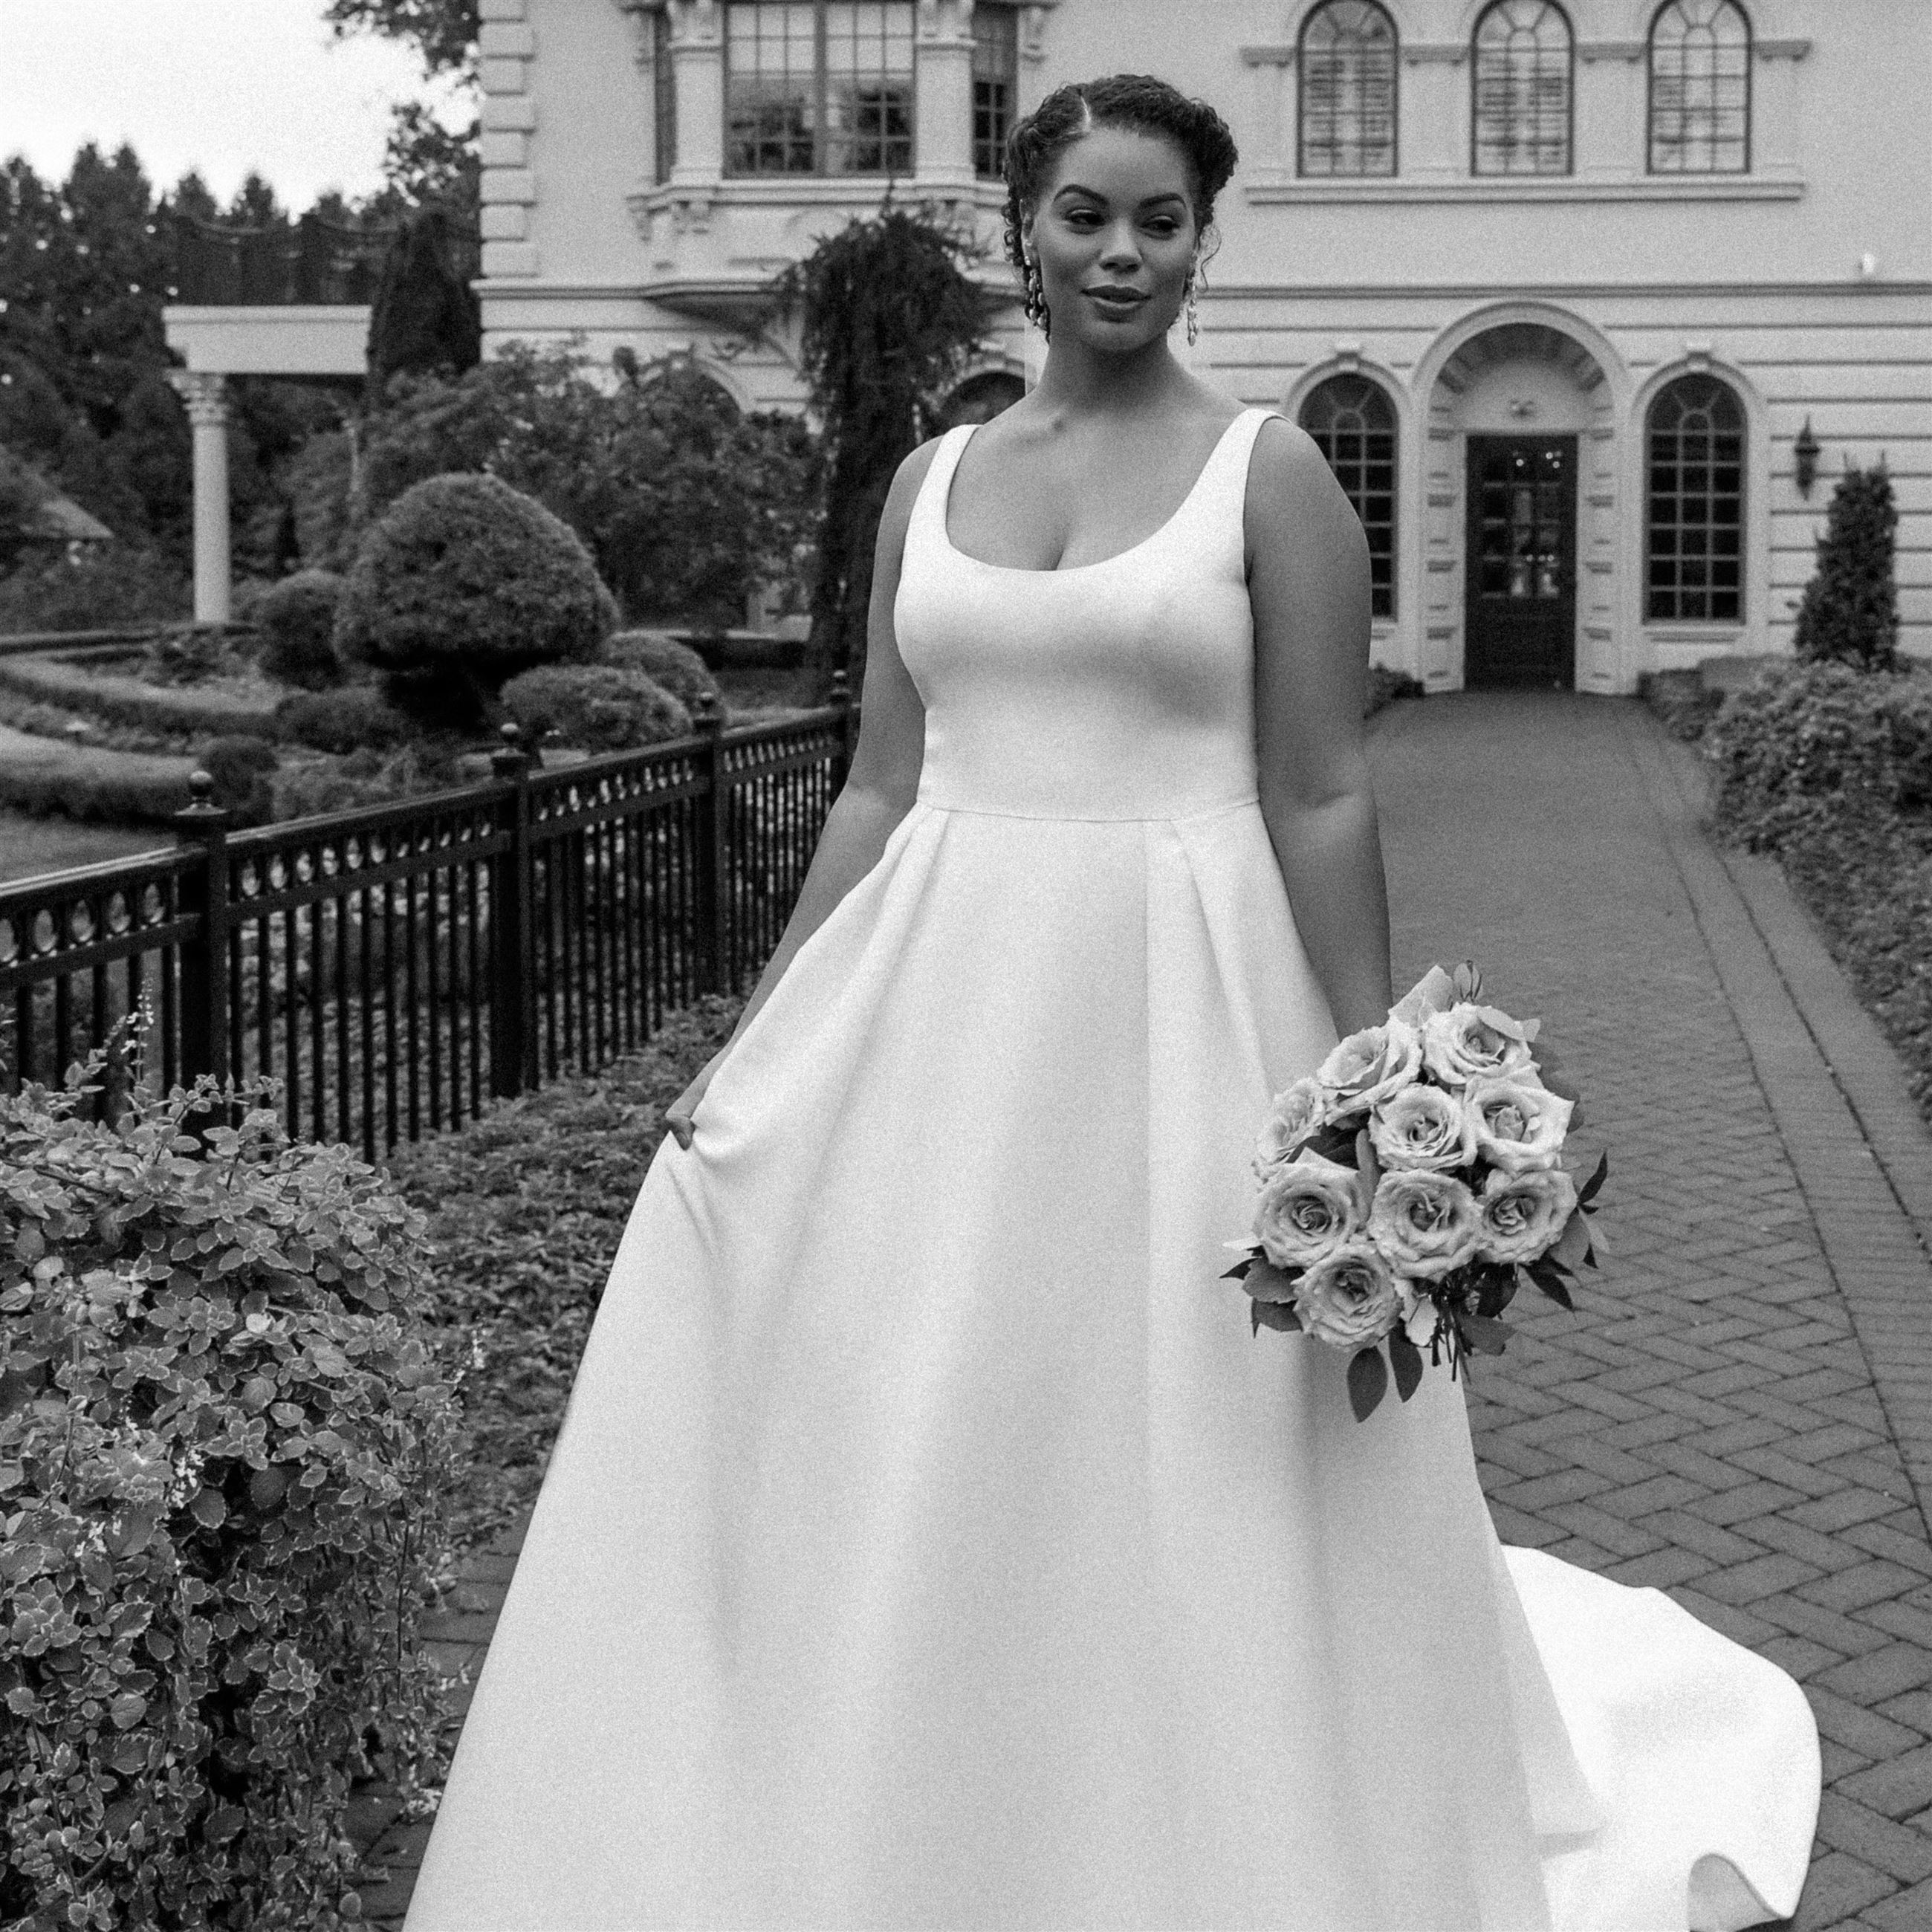 This is How You Can Find the Plus Size Wedding Dress of Your Dreams